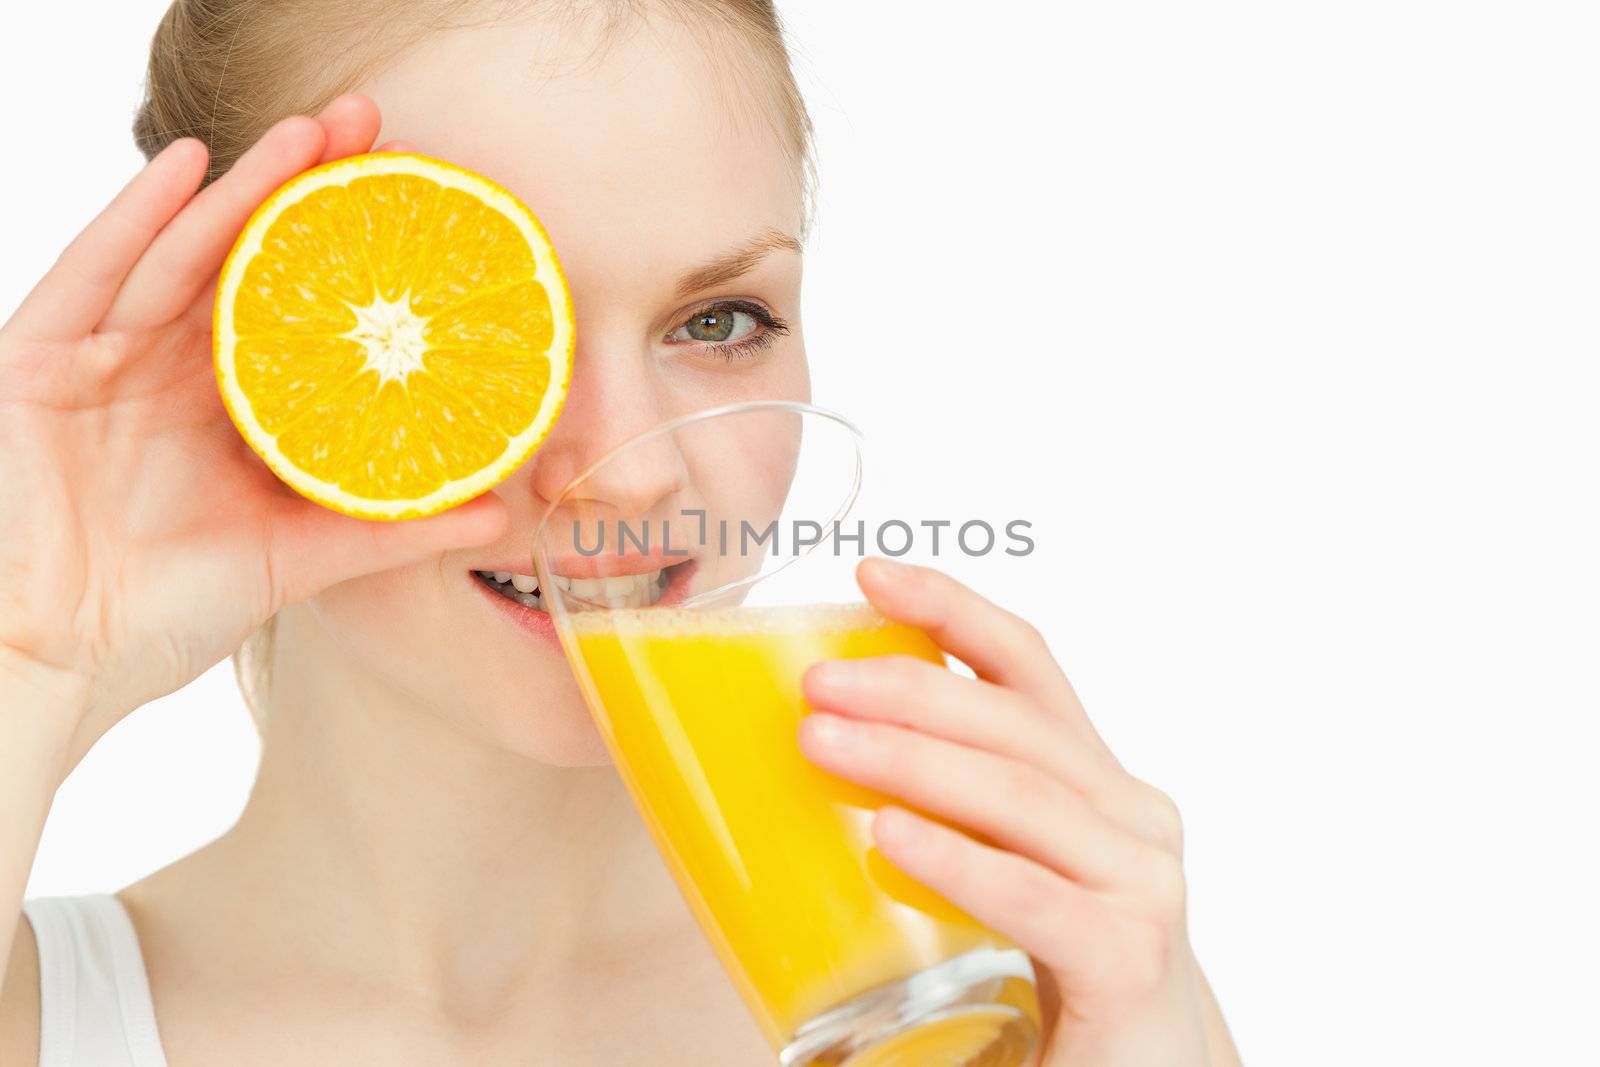 Woman placing an orange on her eye while drinking against white background